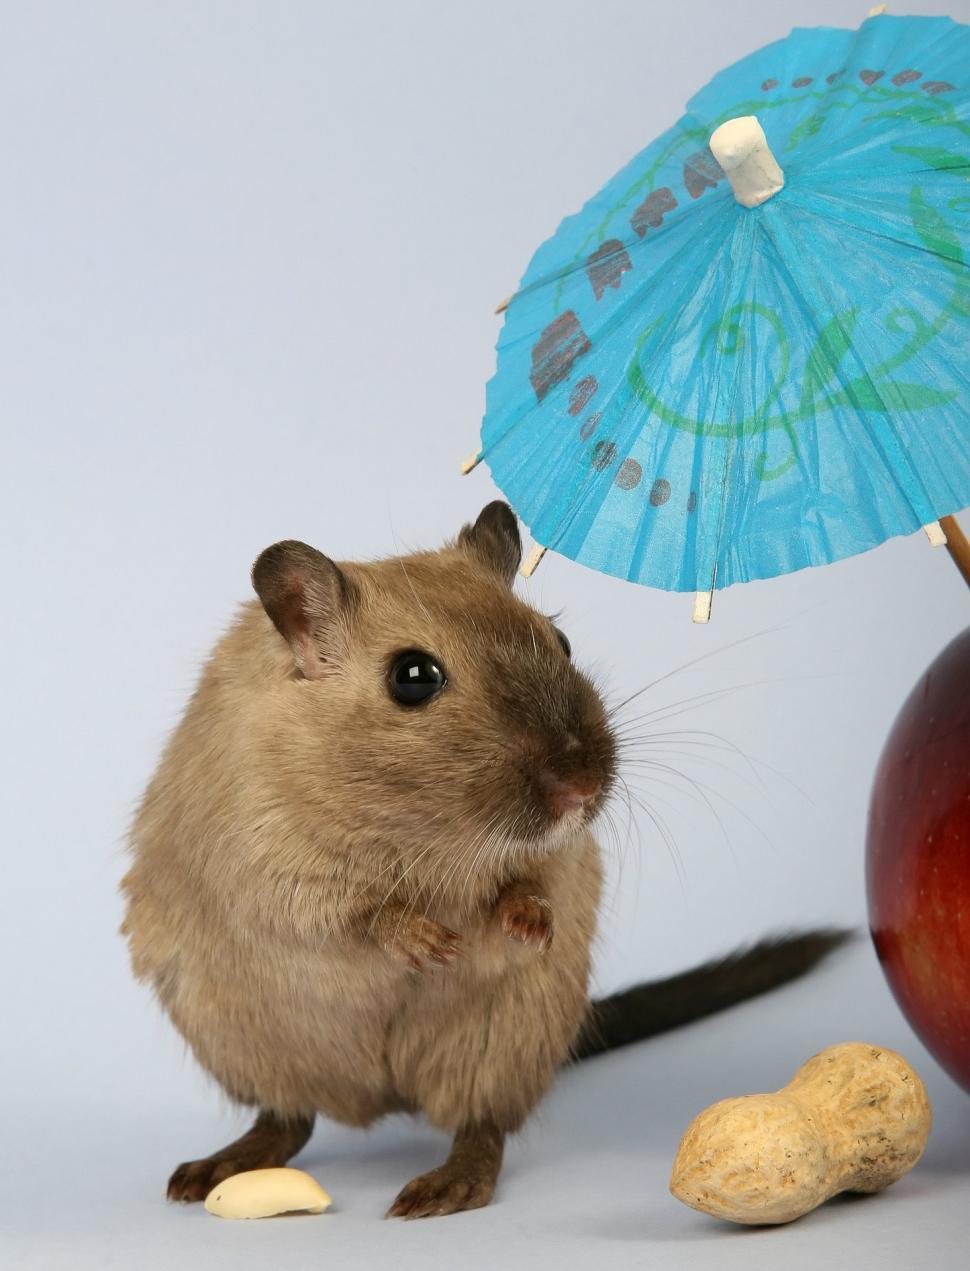 Free Image of Small Rodent Standing Next to Blue Umbrella 